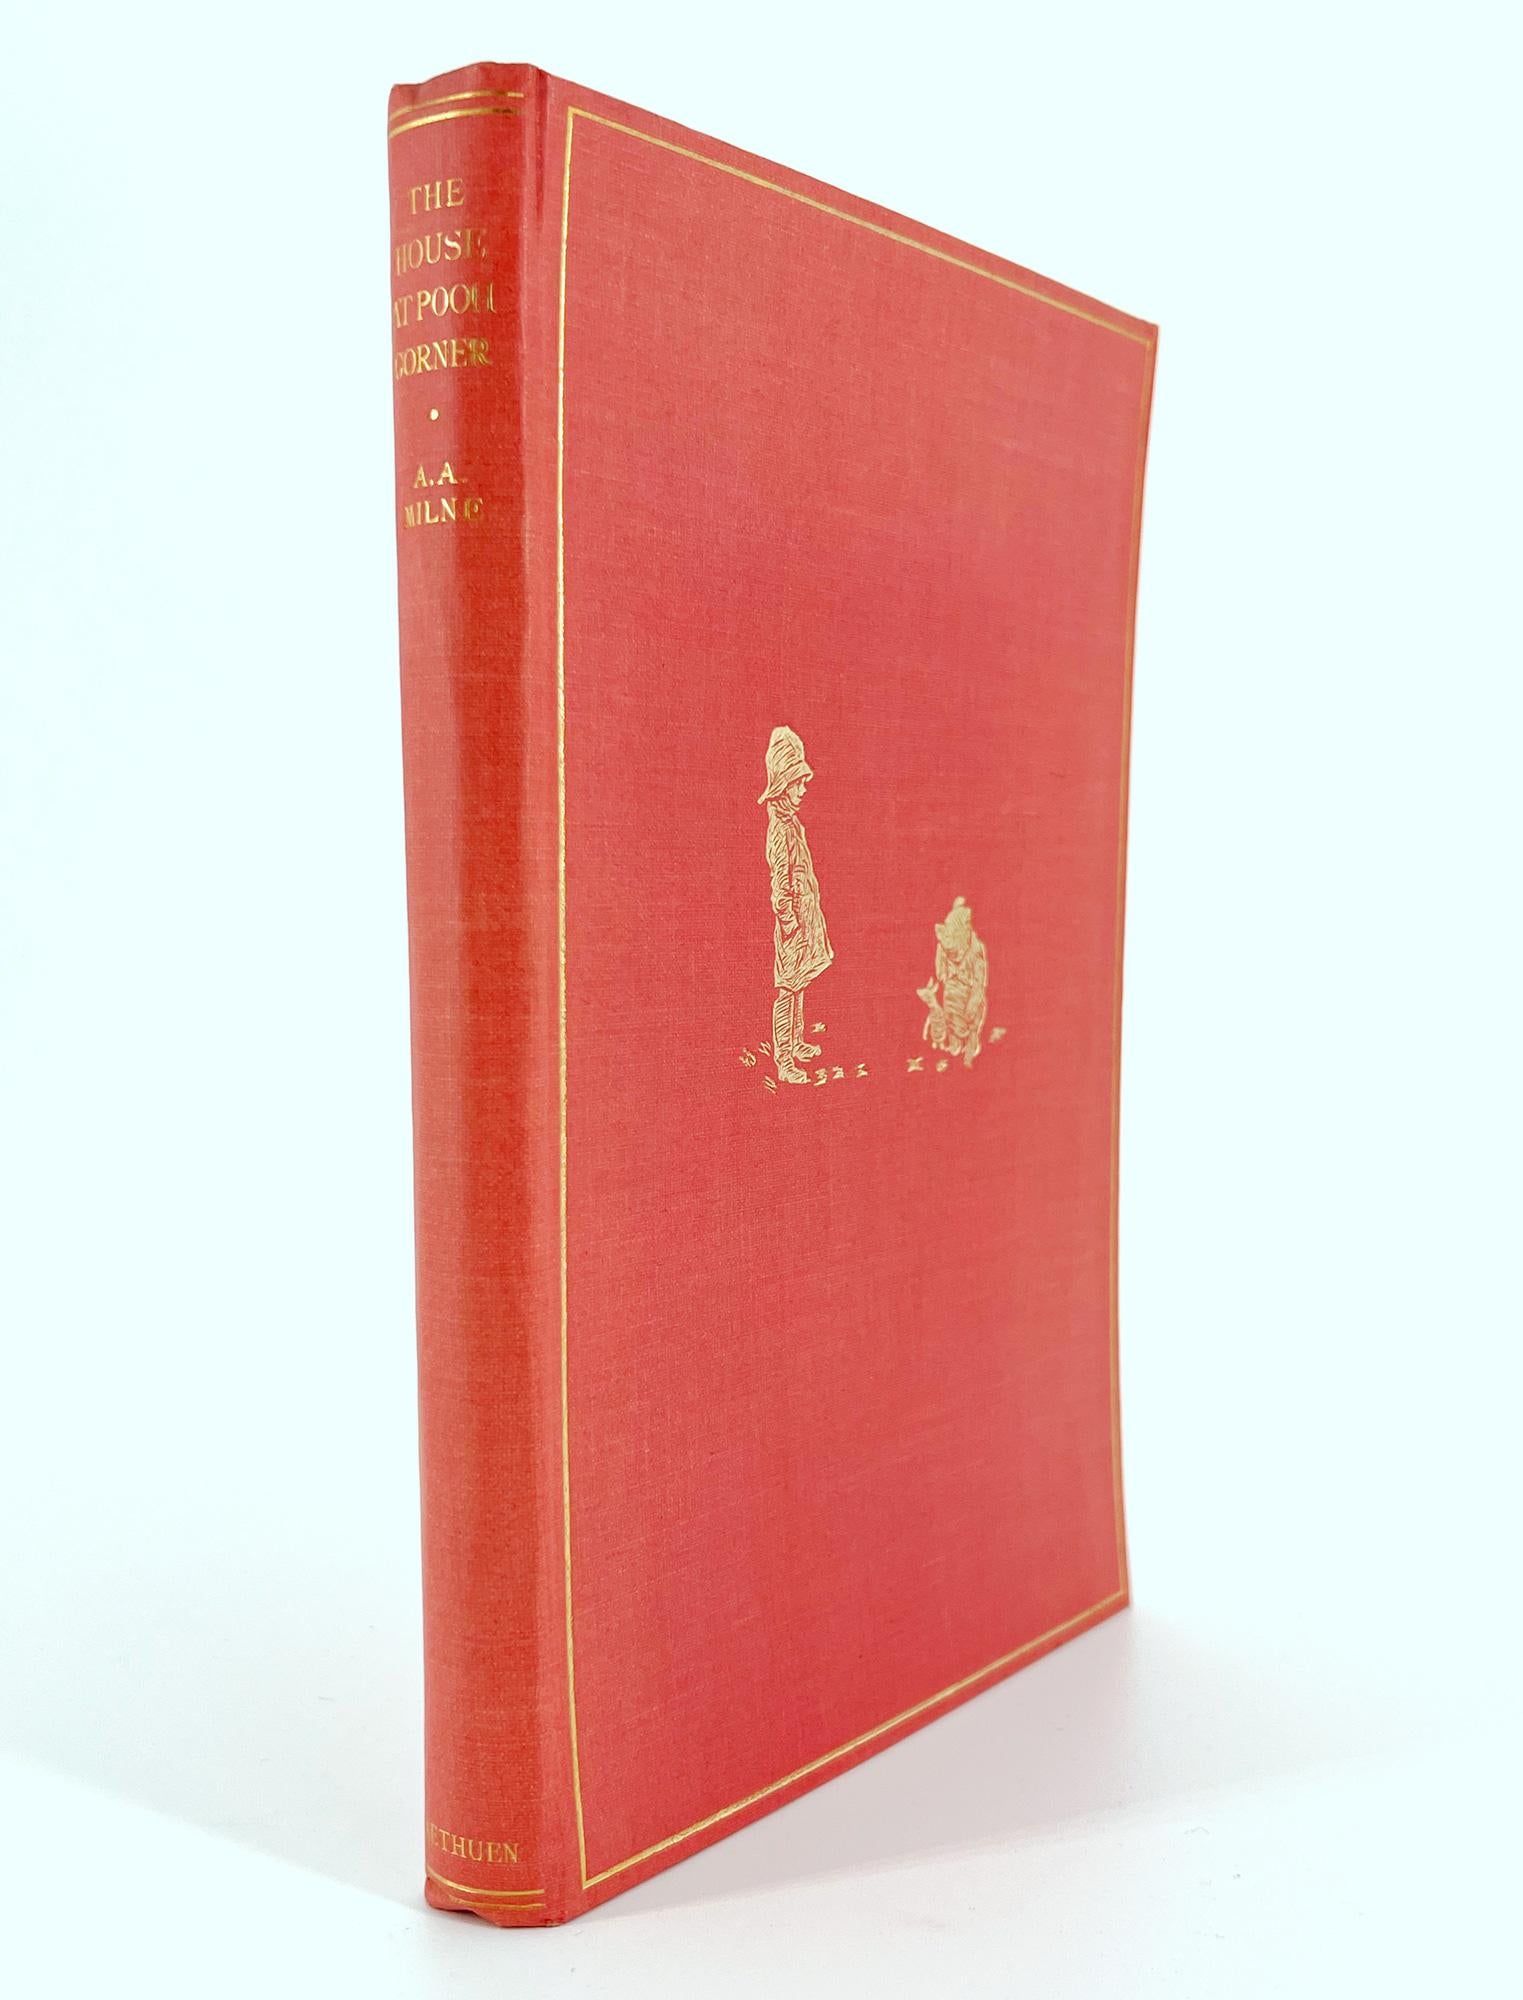 Milne, A.A. (Alan Alexander: 1882–1956). The House at Pooh Corner. 
London: Methuen & Co. Ltd., 1928. First Edition. 
Crown 8vo, 7 1/2 x 5 in (192 x 127 mm), pp. 178, full-page and text illustrations. Original pink cloth cloth, gilt ruling and